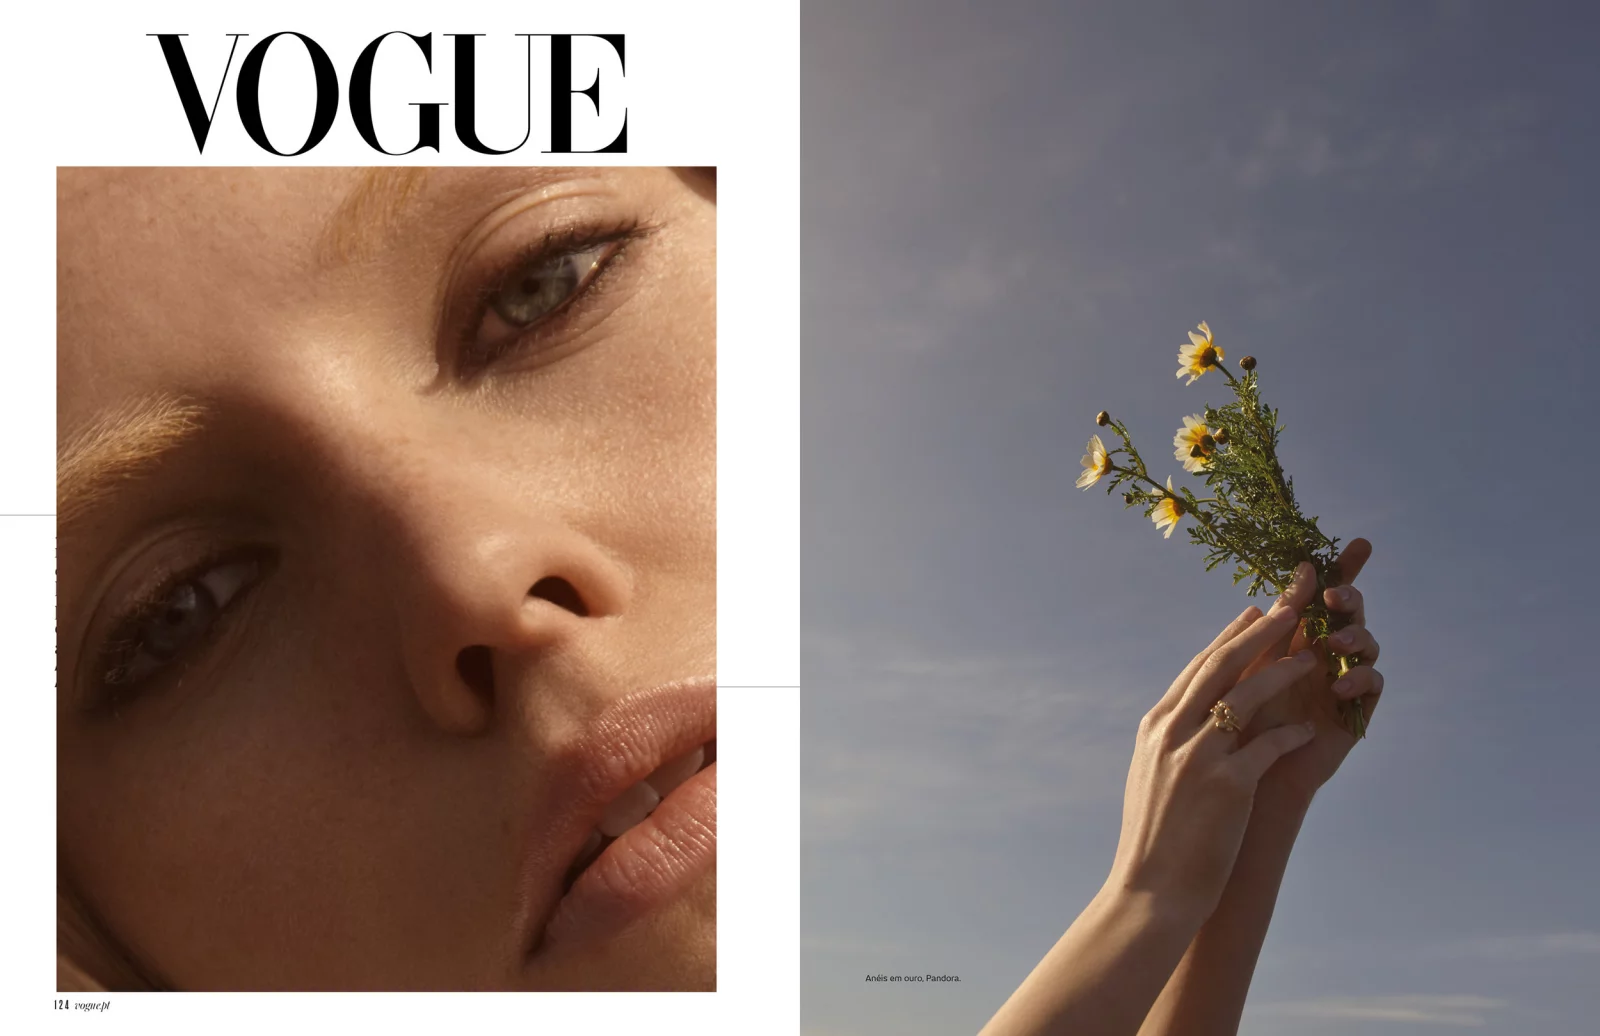 Vogue Portugal 1 by Andreas ORTNER